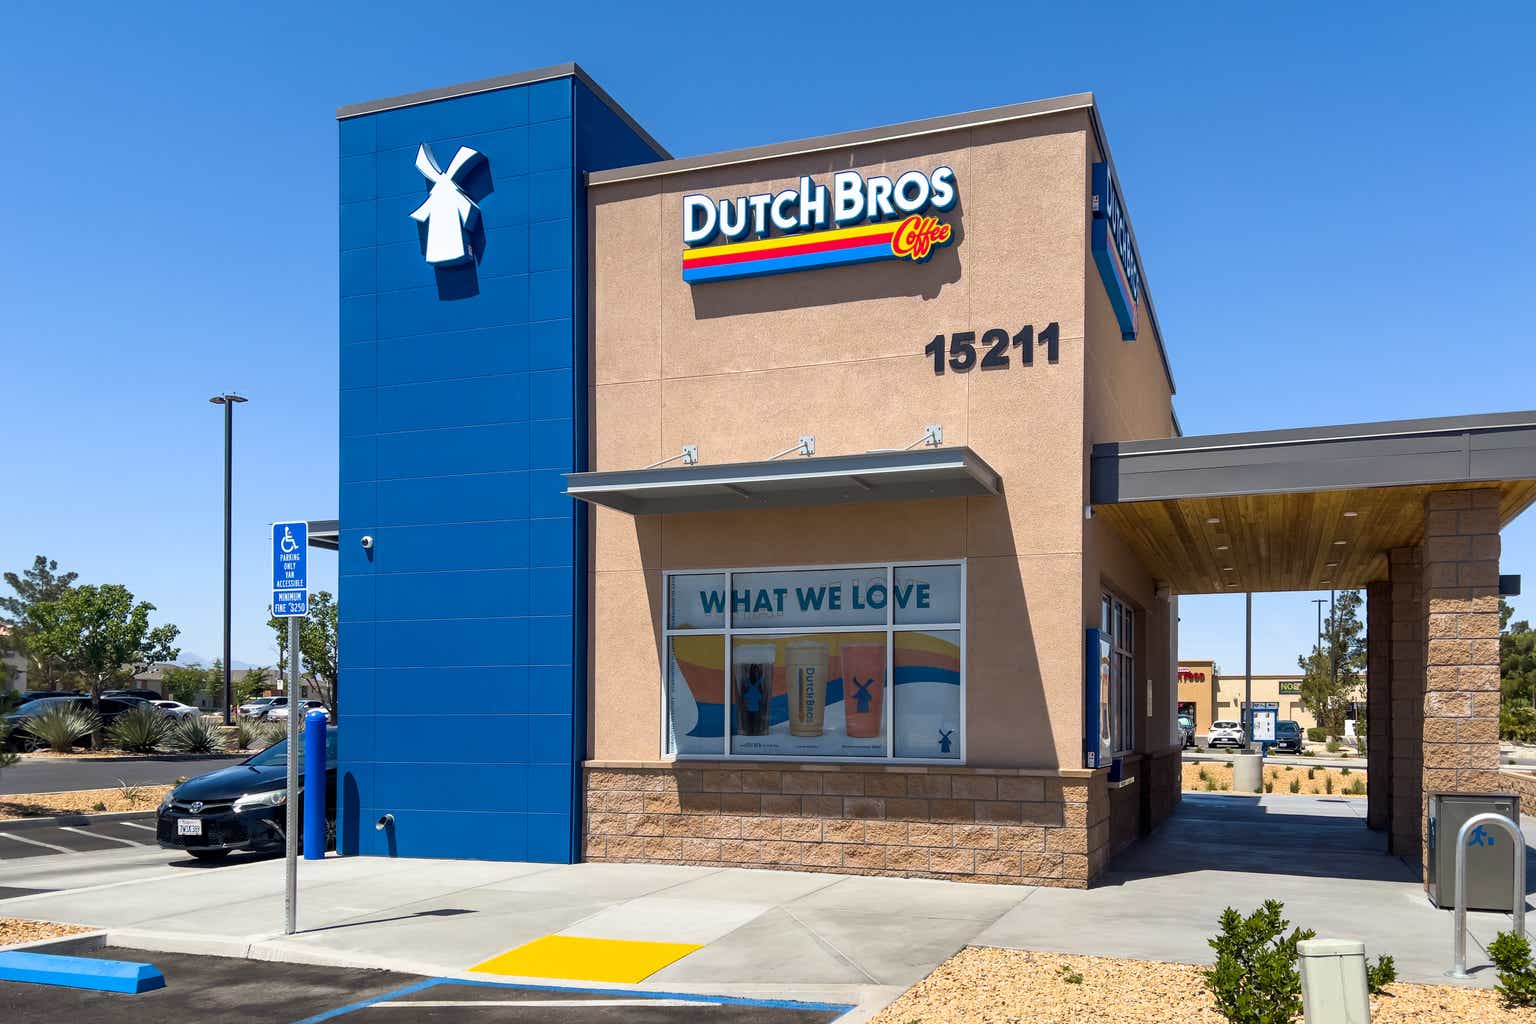 Dutch Bros stock boosted by earnings beat, raised revenue forecast